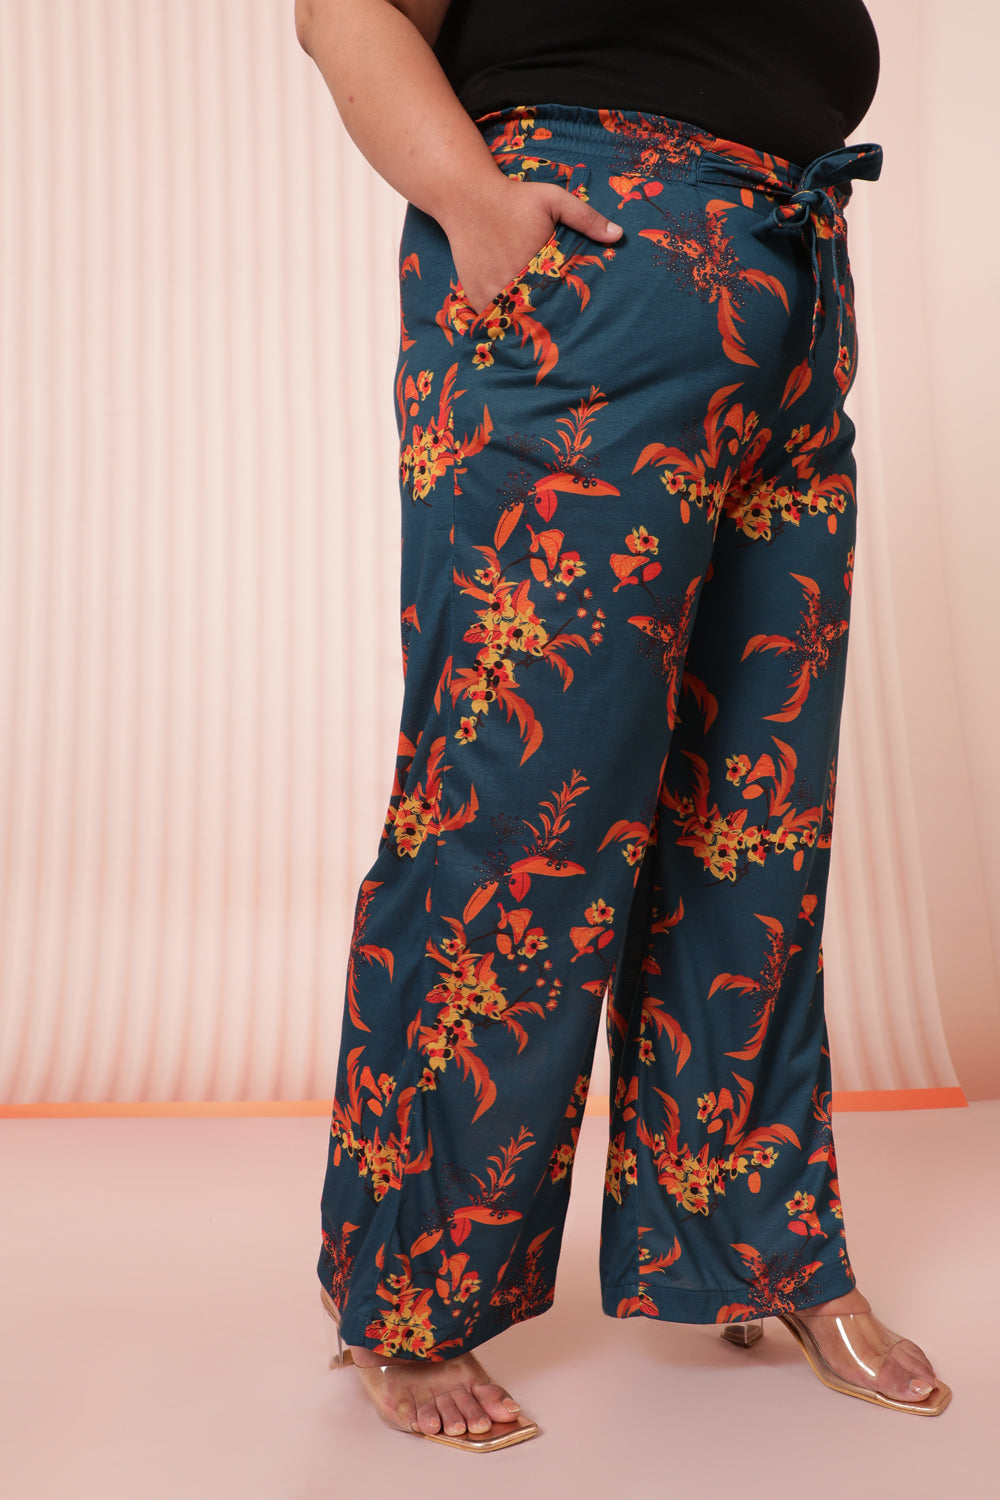 Teal Red Floral High Waist Pants